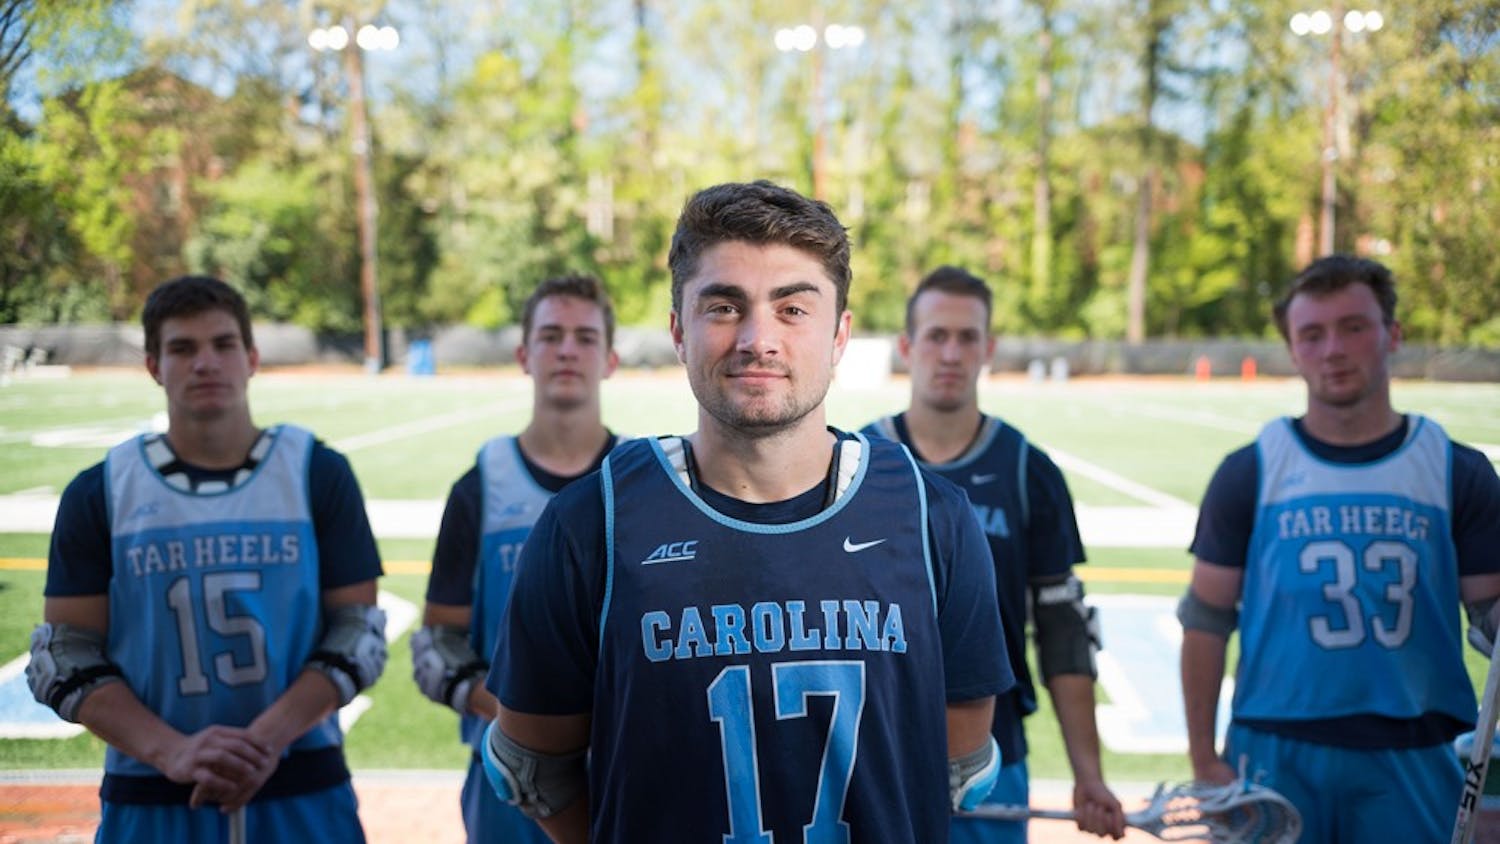 Austin Pifani is a senior defender for the North Carolina men's lacrosse team. The&nbsp;two-time captain helped lead the turnaround last year that ended with the Tar Heels' first national title since 1991.